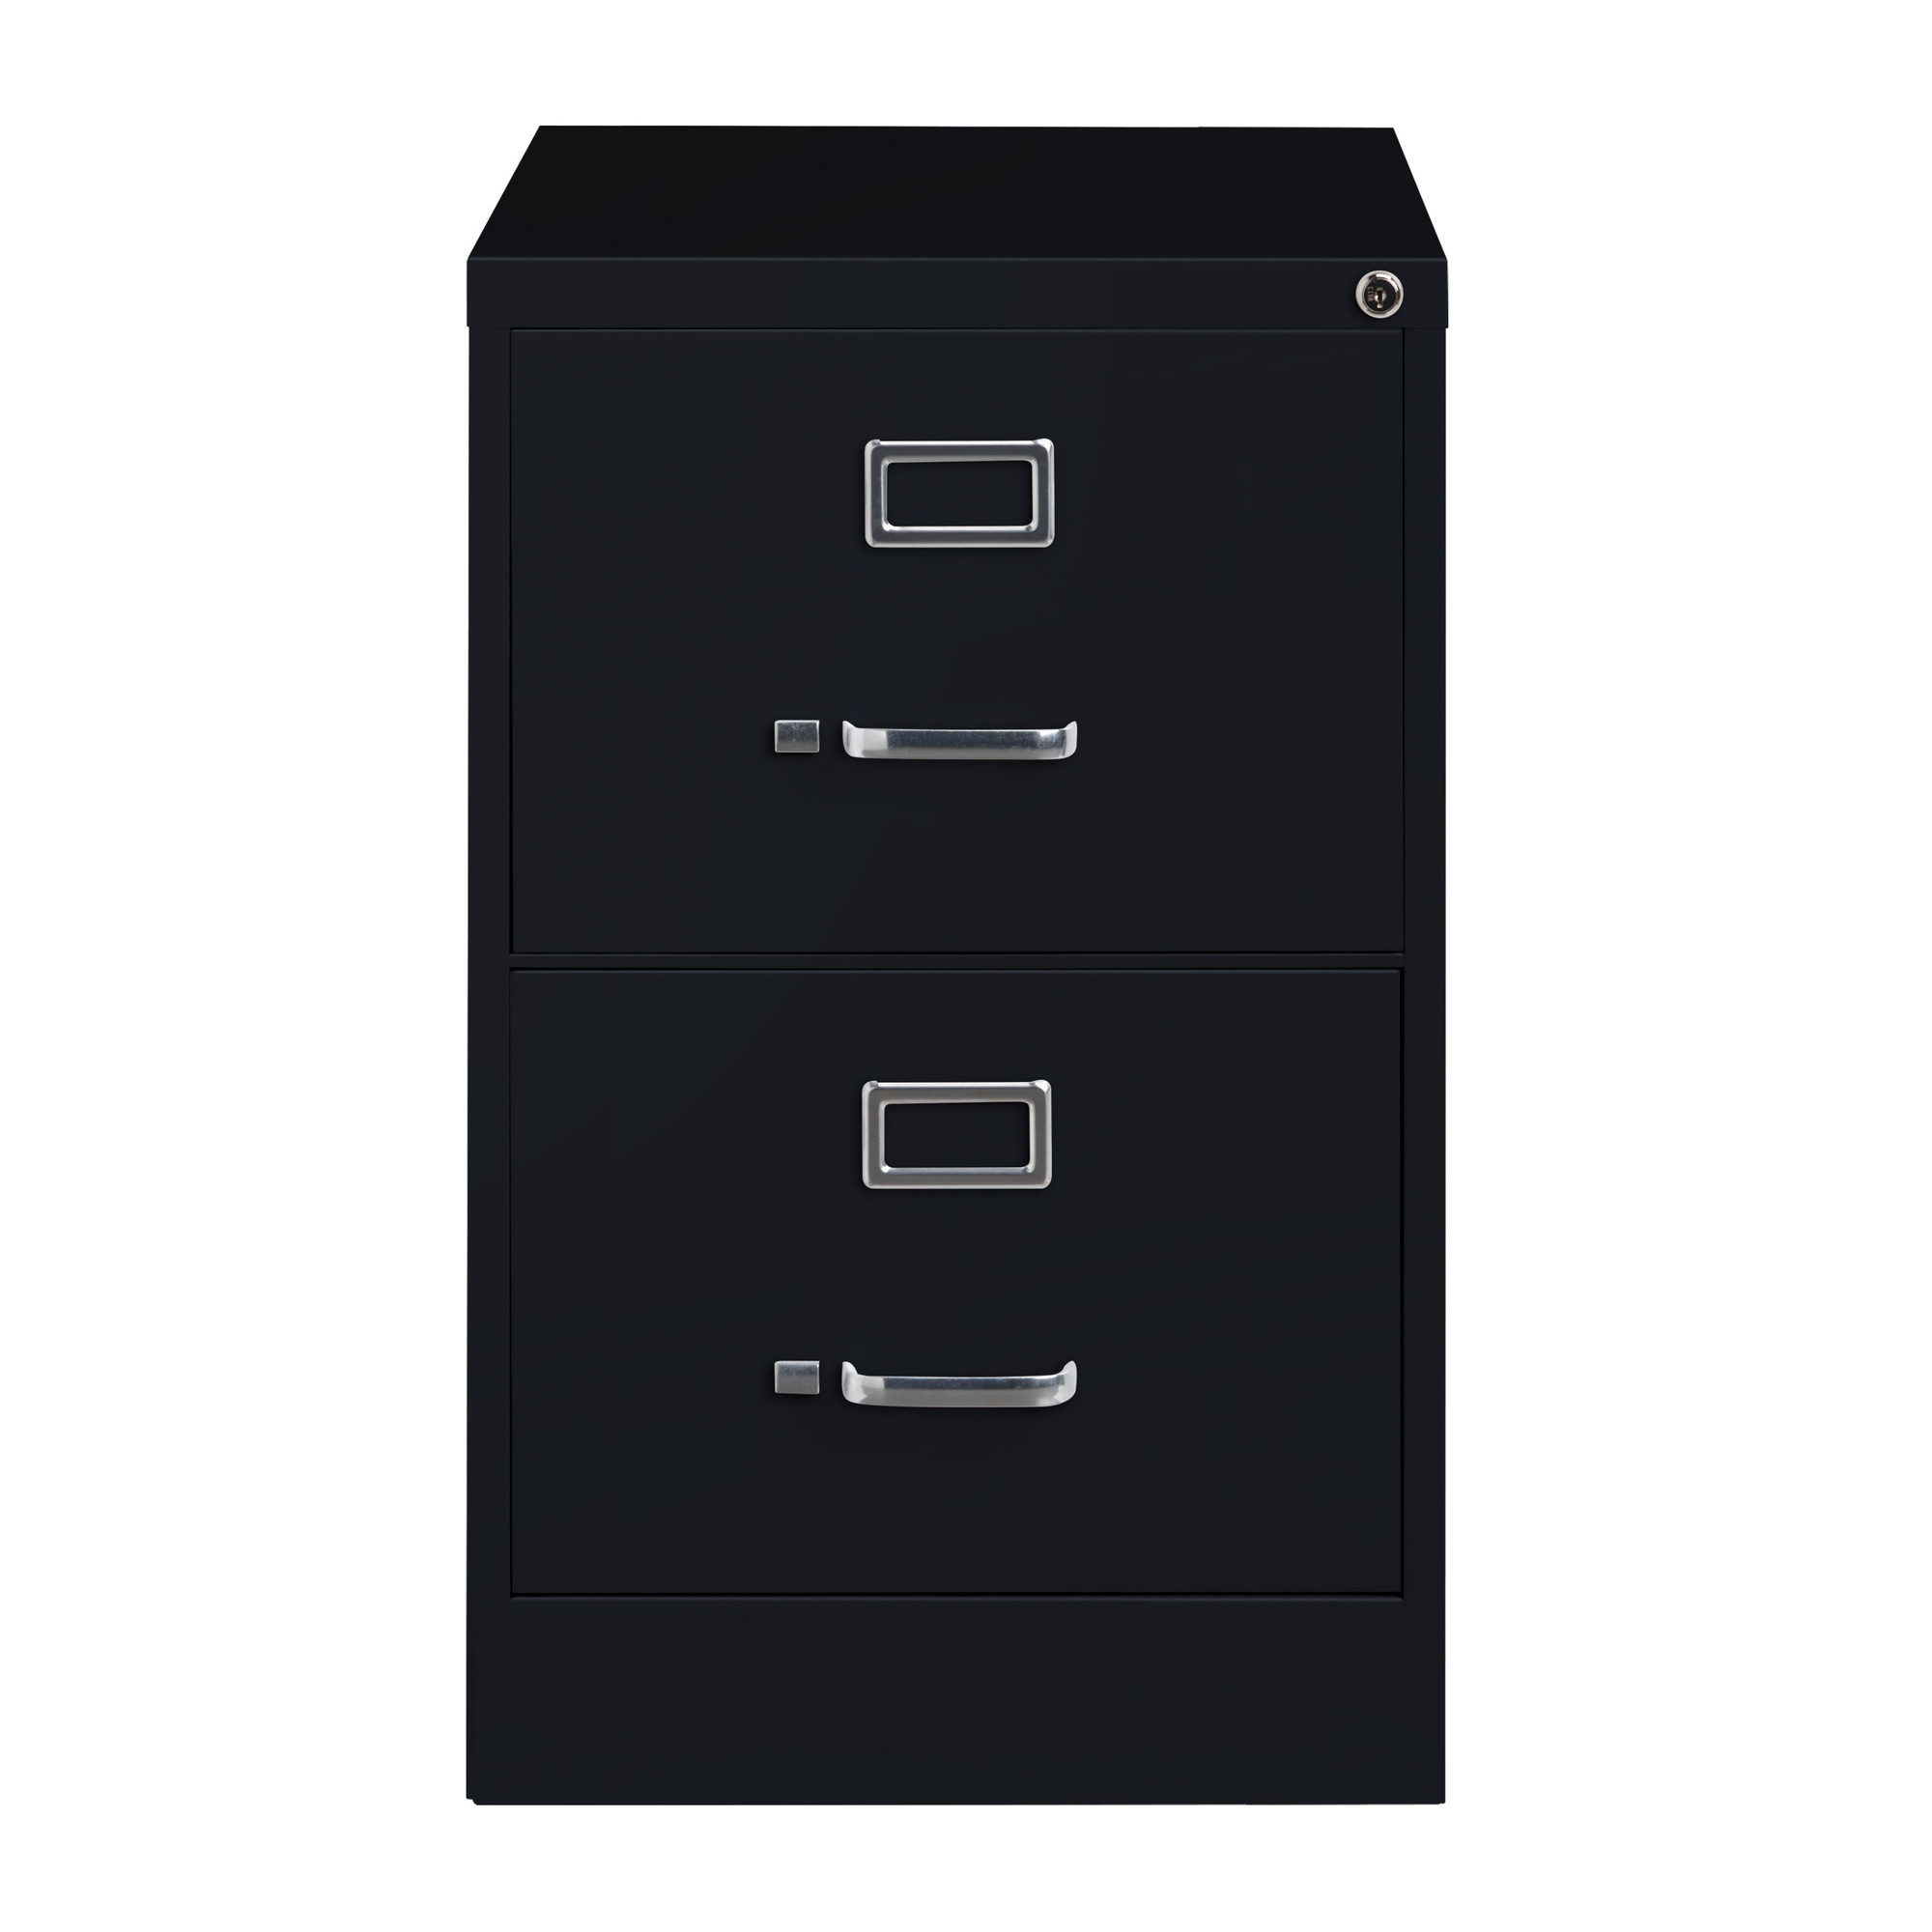 Hirsh Industries, 2 Drawer Legal Width File Cabinet Commercial Grade, Width 18 in, Depth 25 in, Height 28.375 in, Model 14413